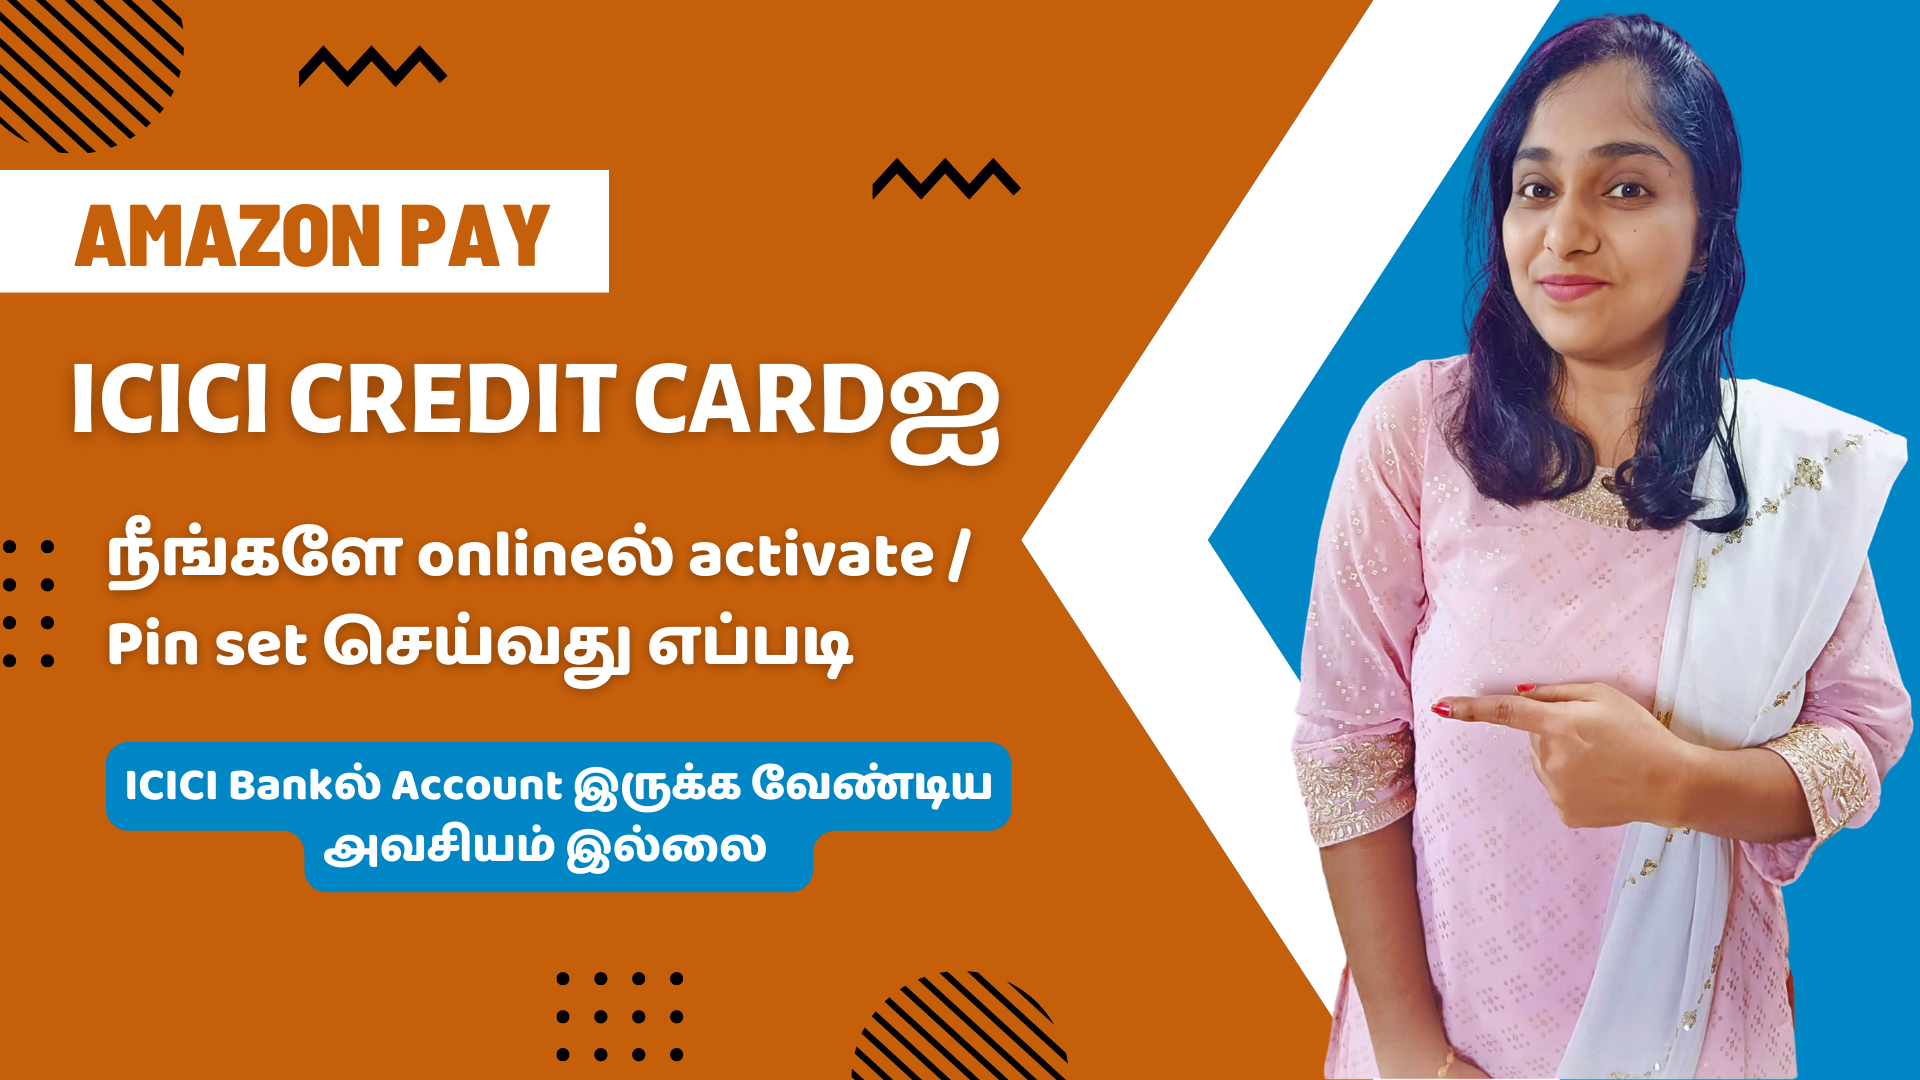 Amazon Pay ICICI Credit Card Activation